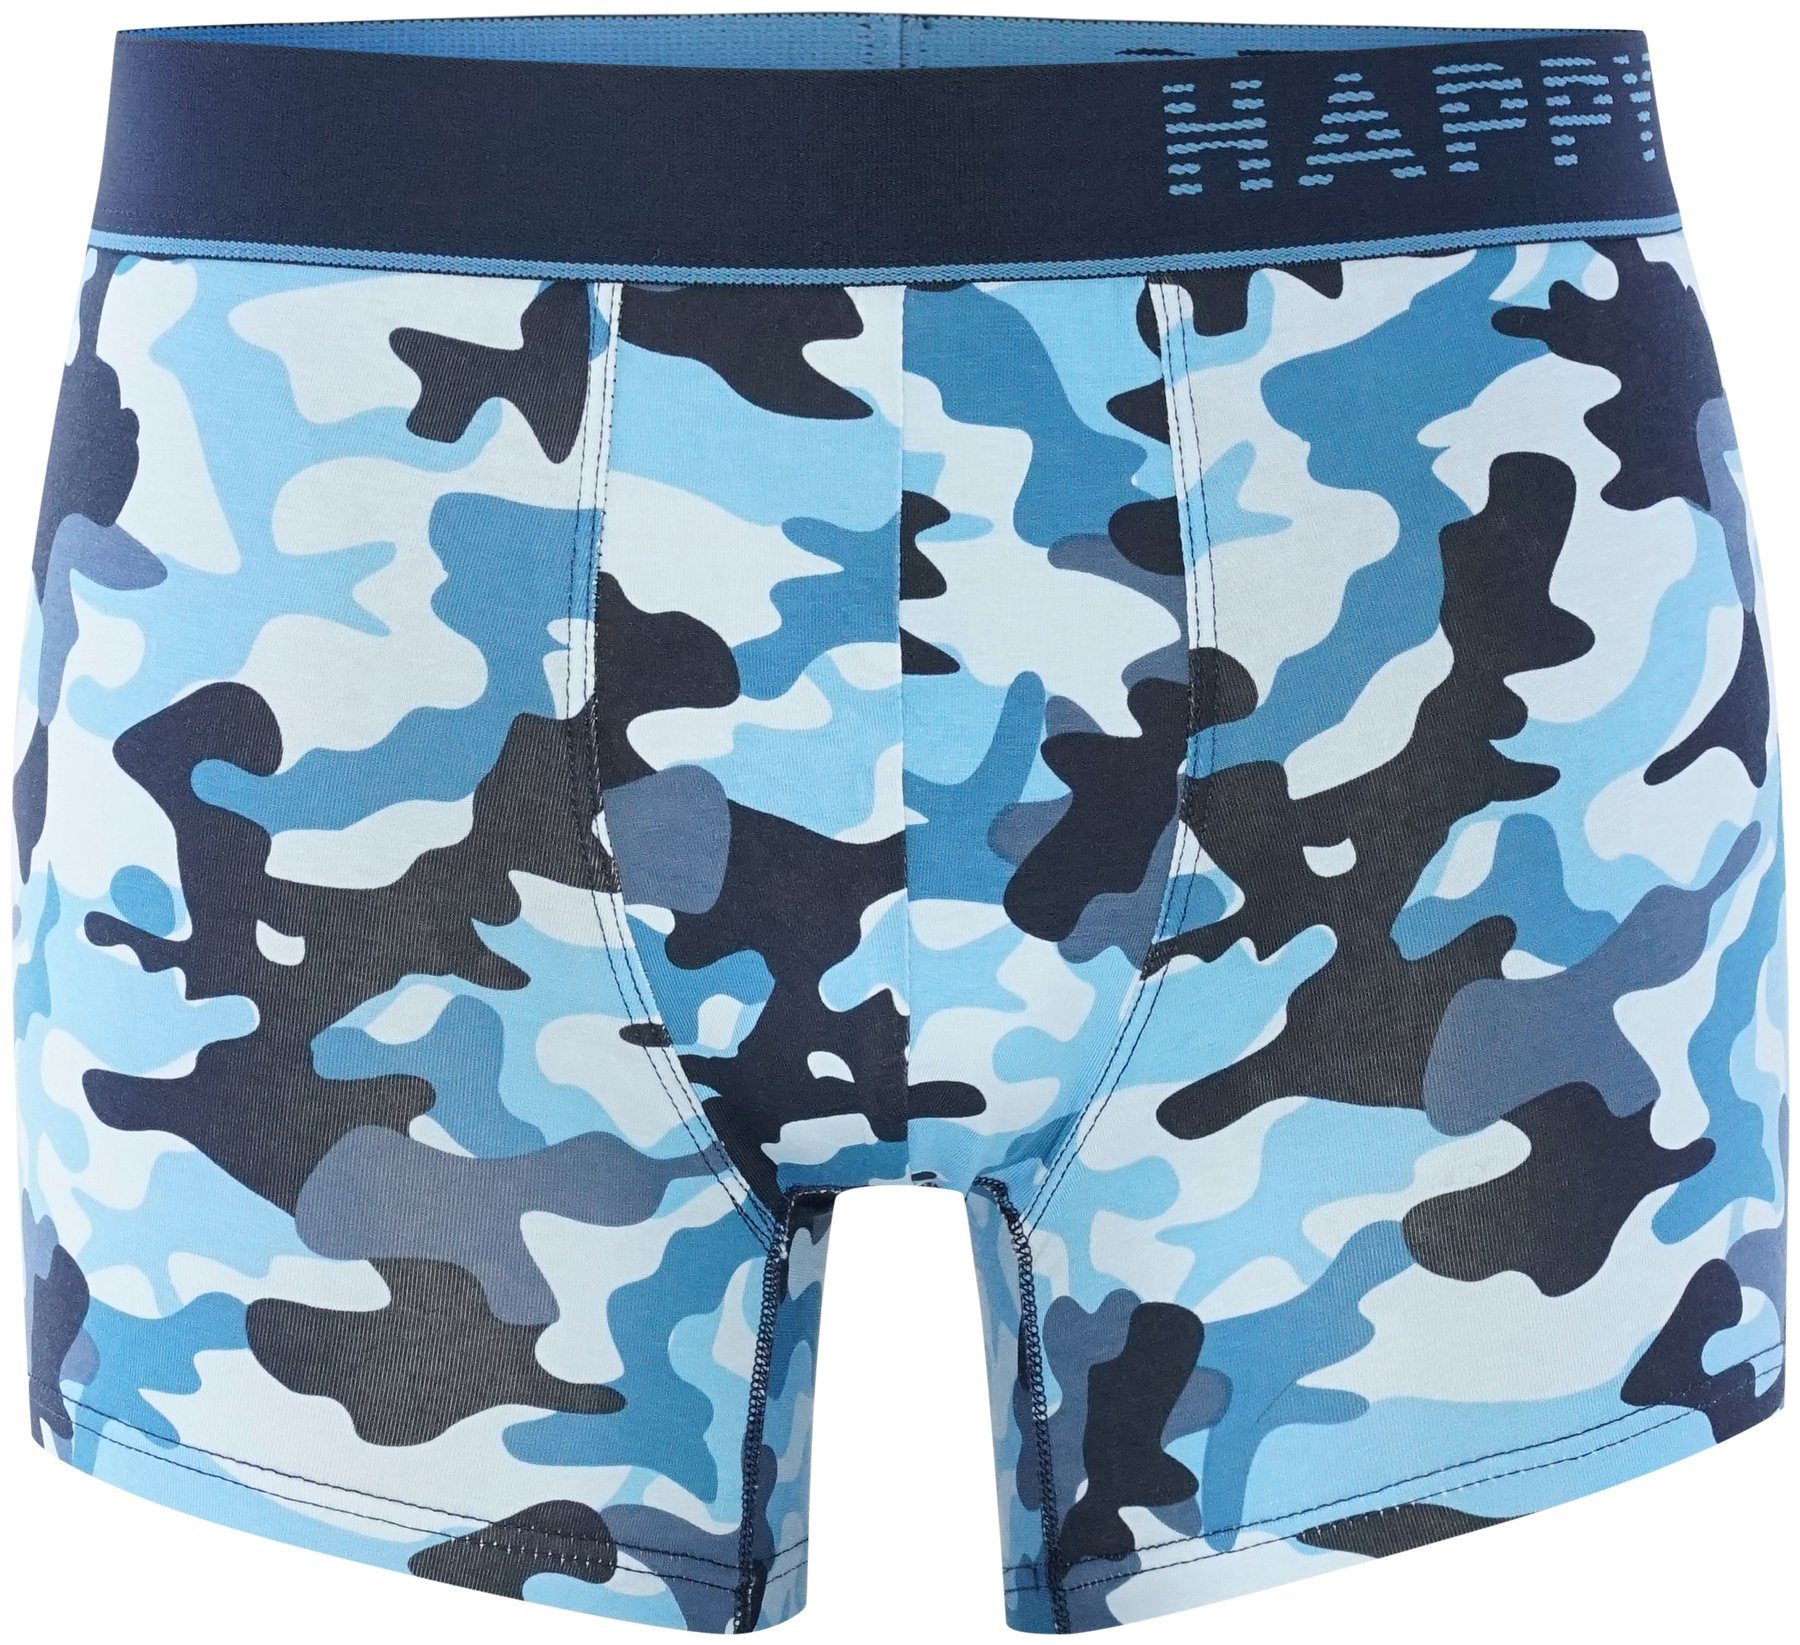 Camouflage SHORTS 2-Pack HAPPY Pants Retro